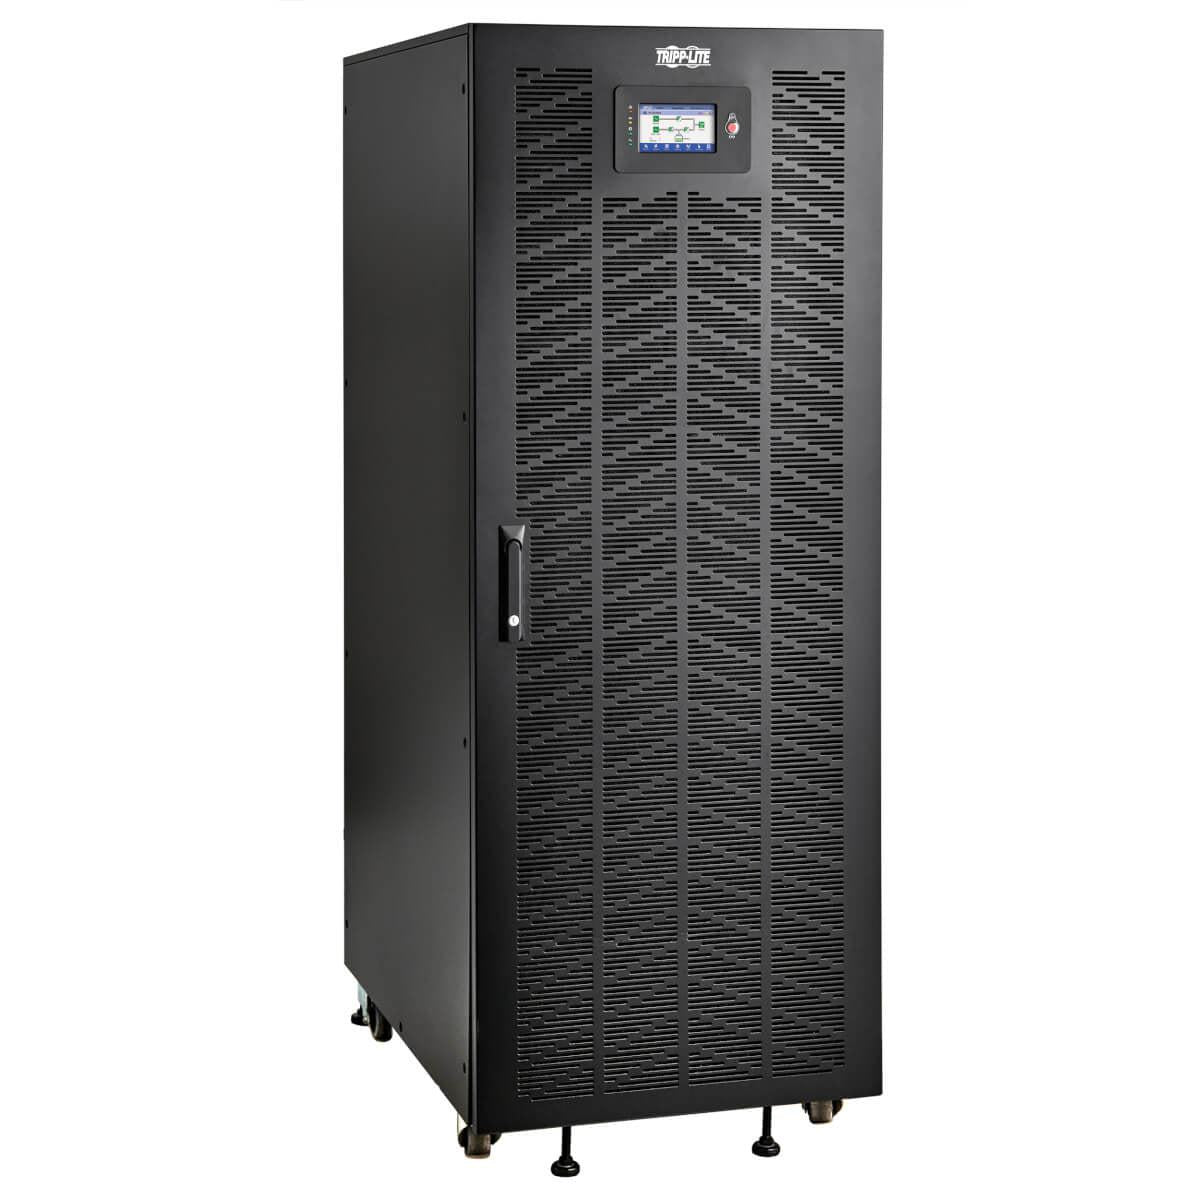 Tripp Lite 3-Phase 208/220/120/127V 100Kva/Kw Double-Conversion Ups - Unity Pf, External Batteries Required